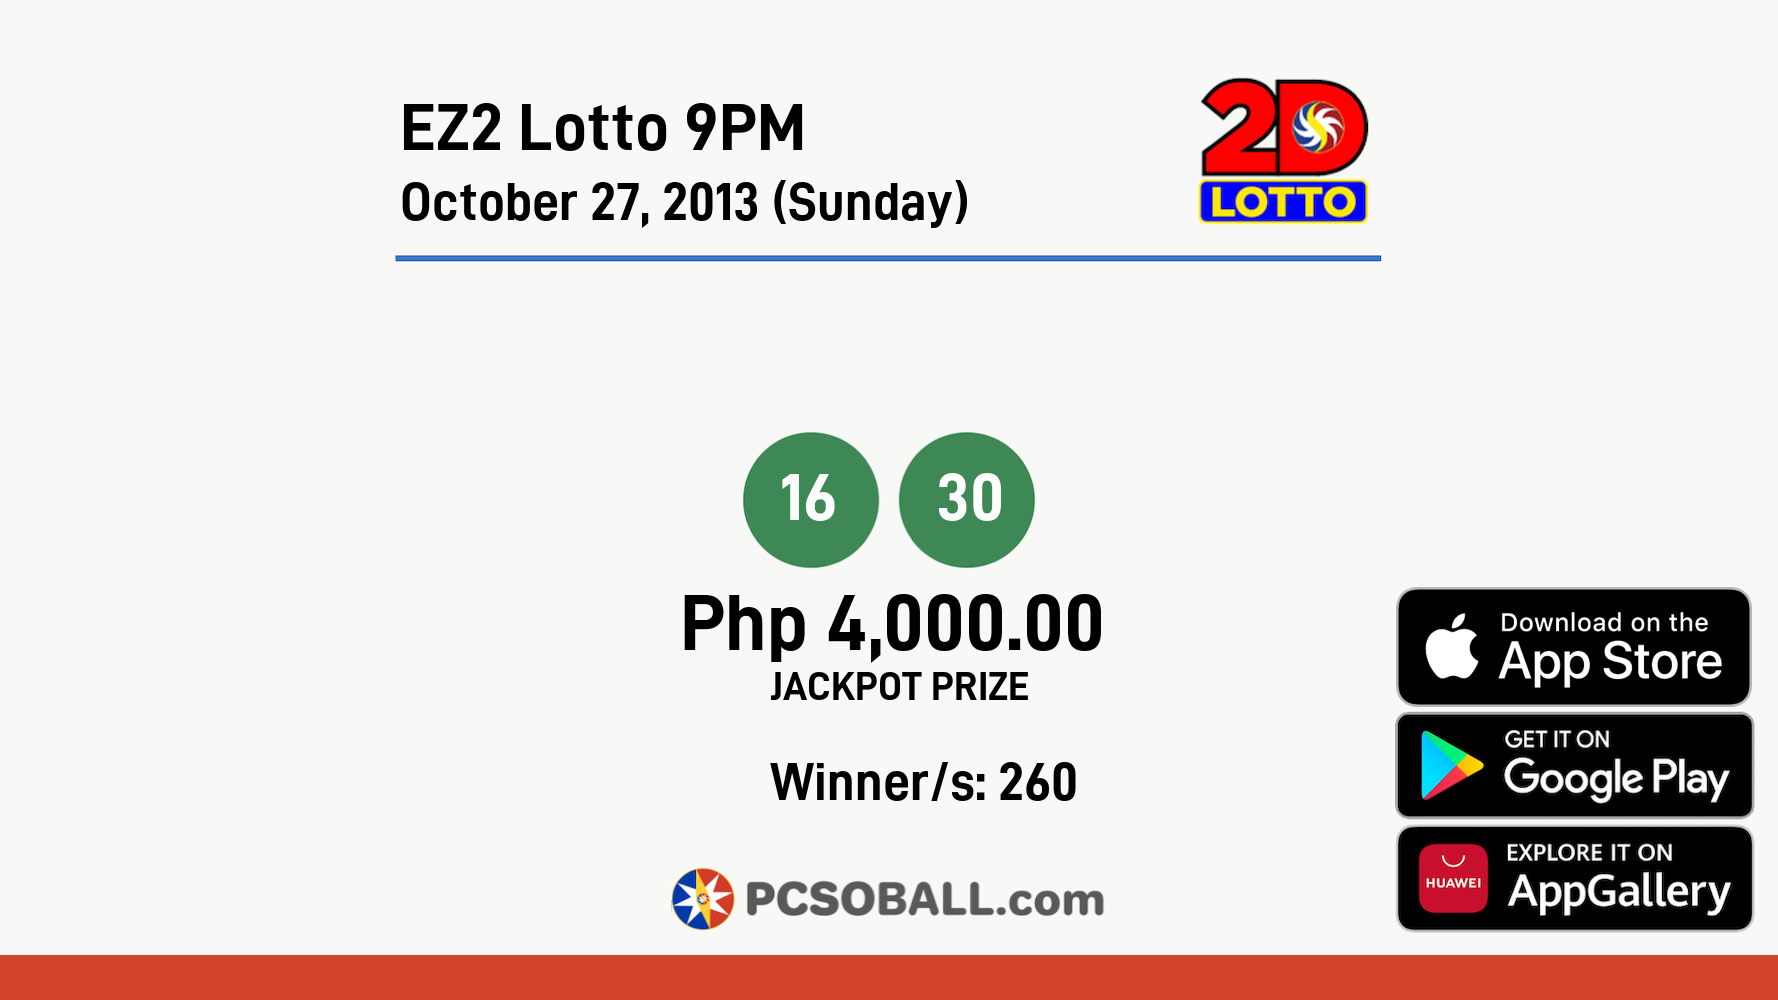 EZ2 Lotto 9PM October 27, 2013 (Sunday) Result